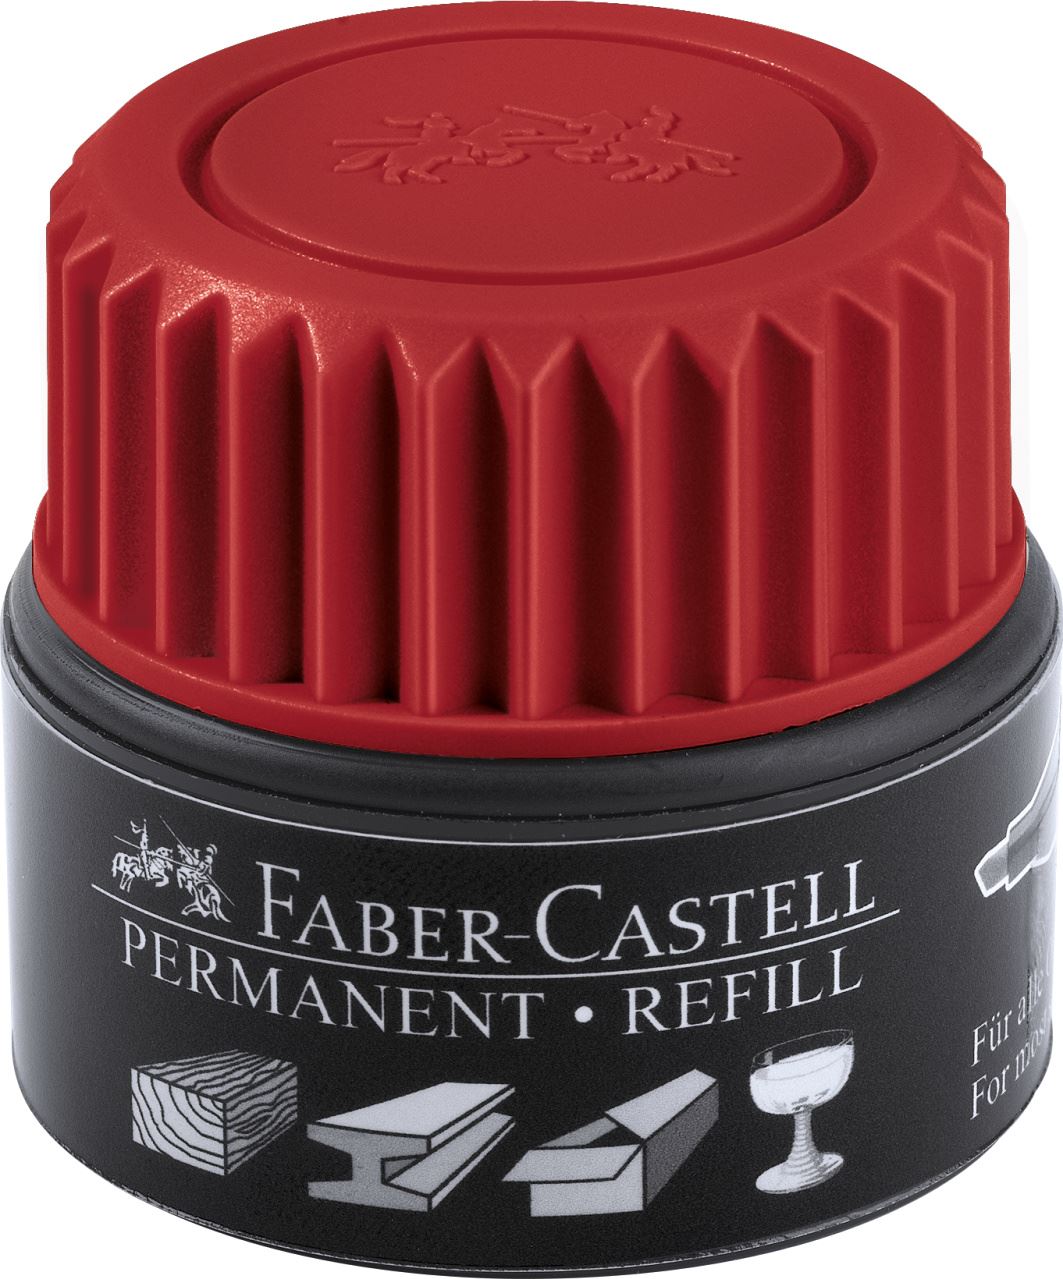 Faber-Castell - Grip refill system, red